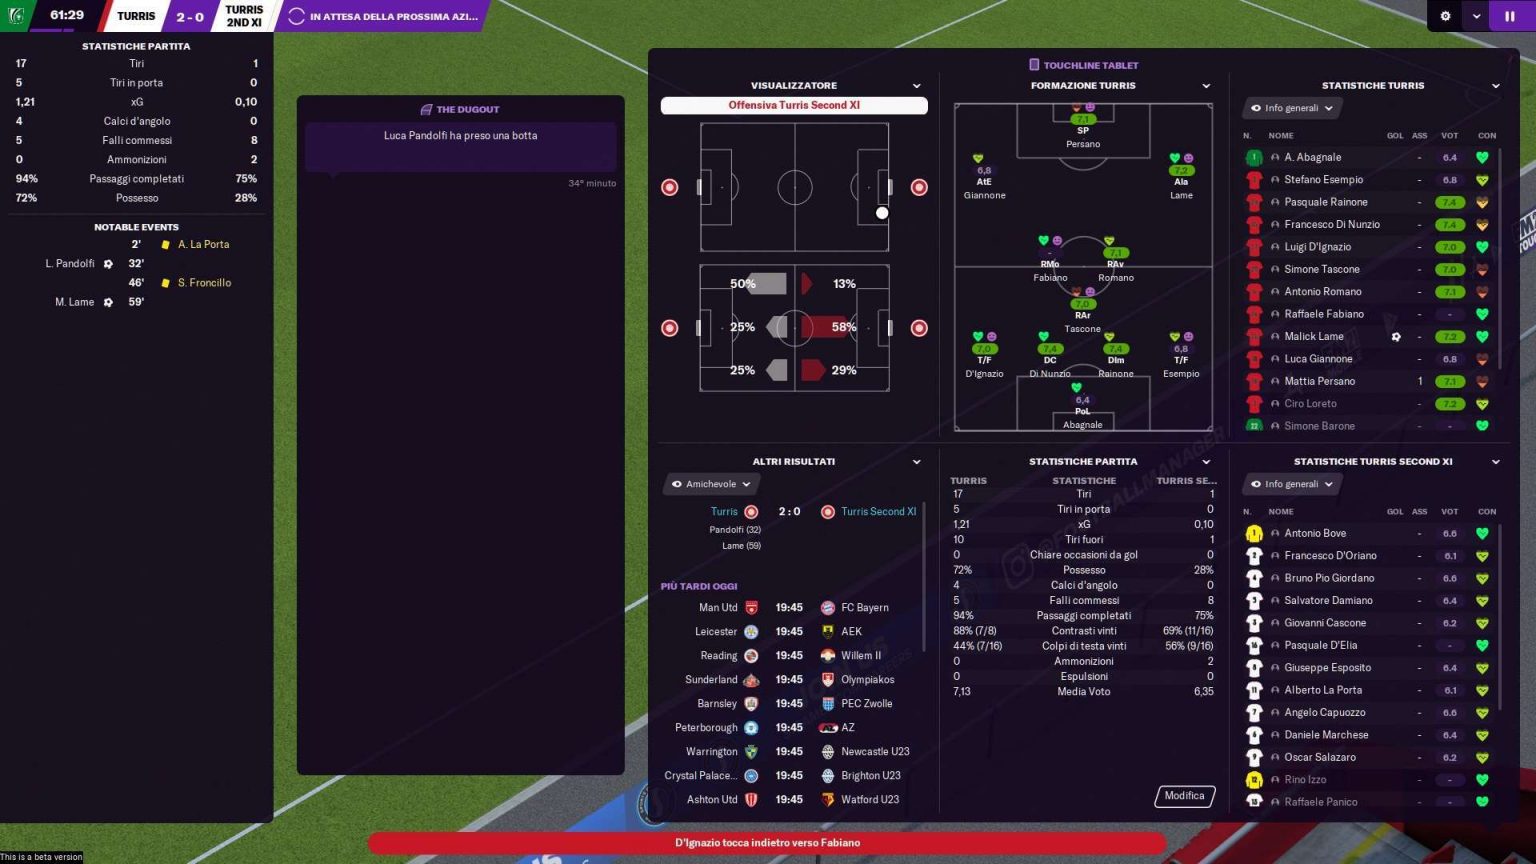 football manager 2023